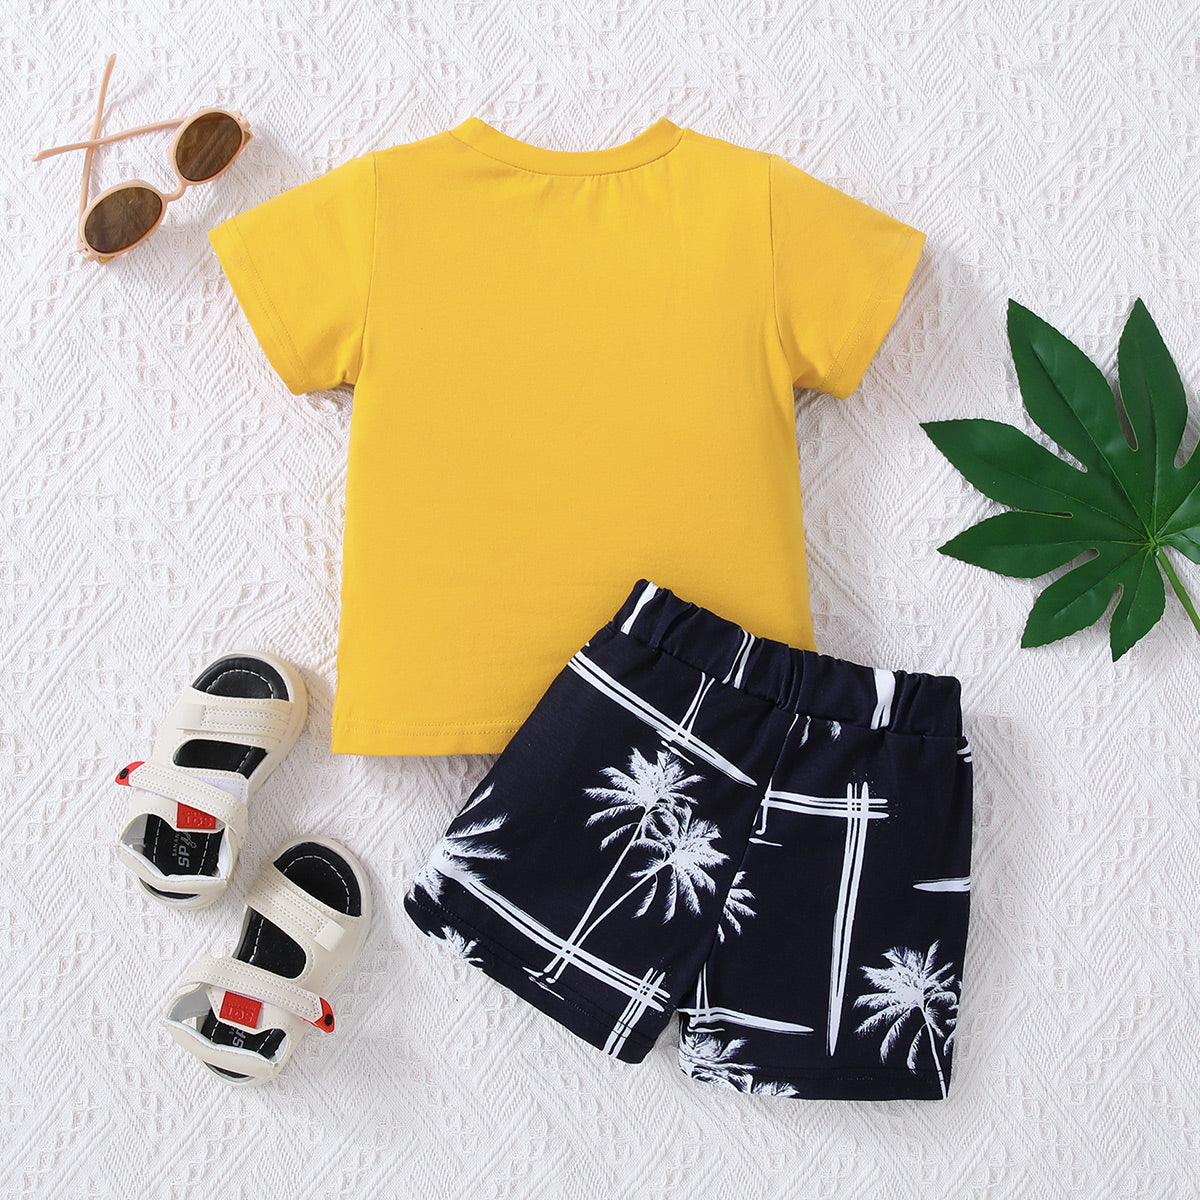 Kids Graphic Tee and Printed Shorts Set - Heart 2 Heart Boutique